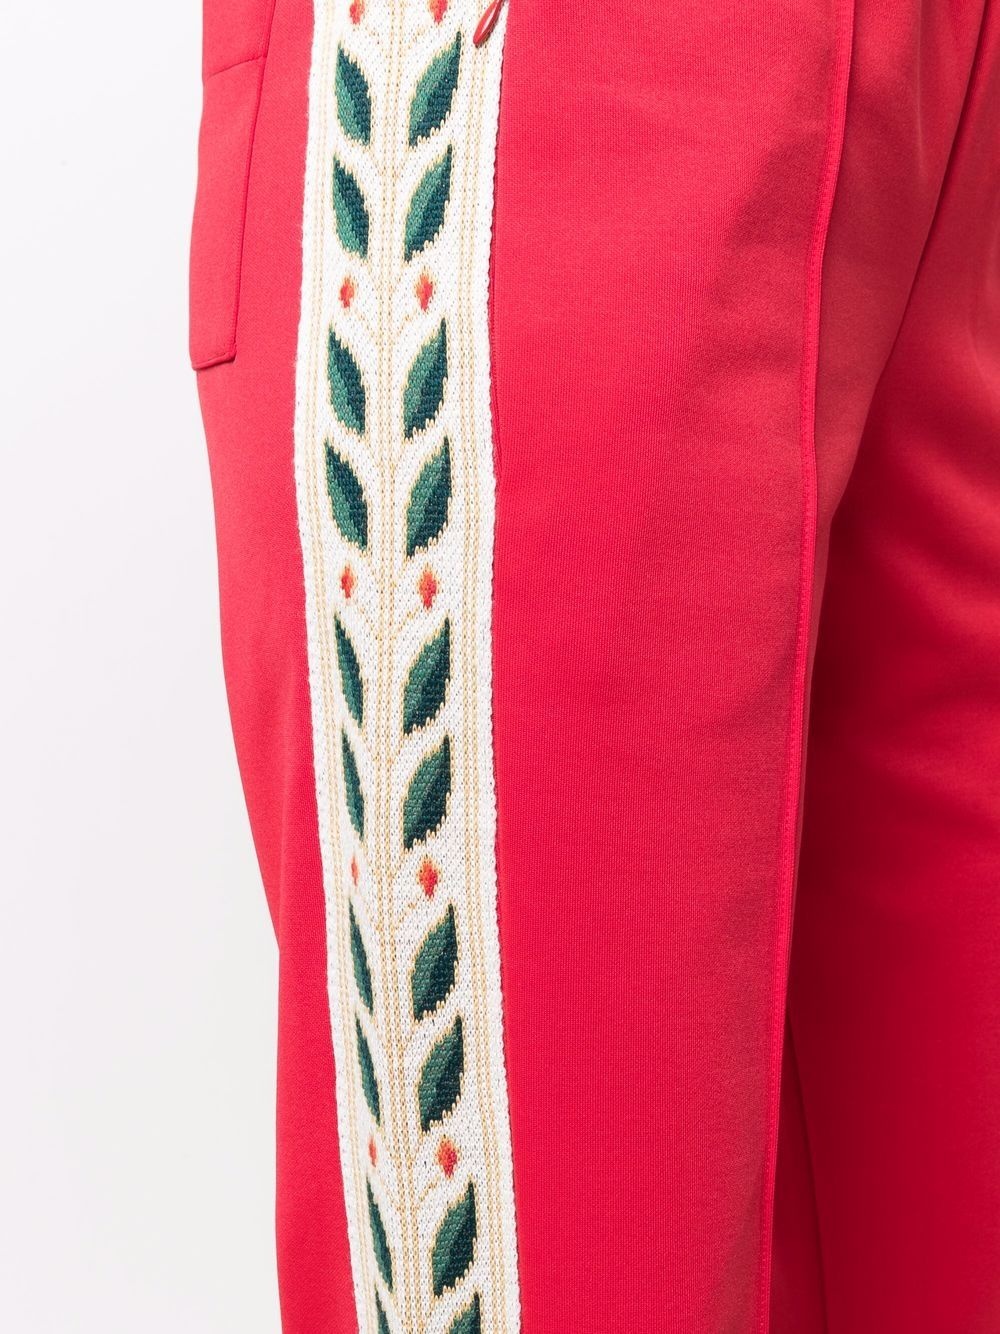 floral-embroidered flared trousers - 5